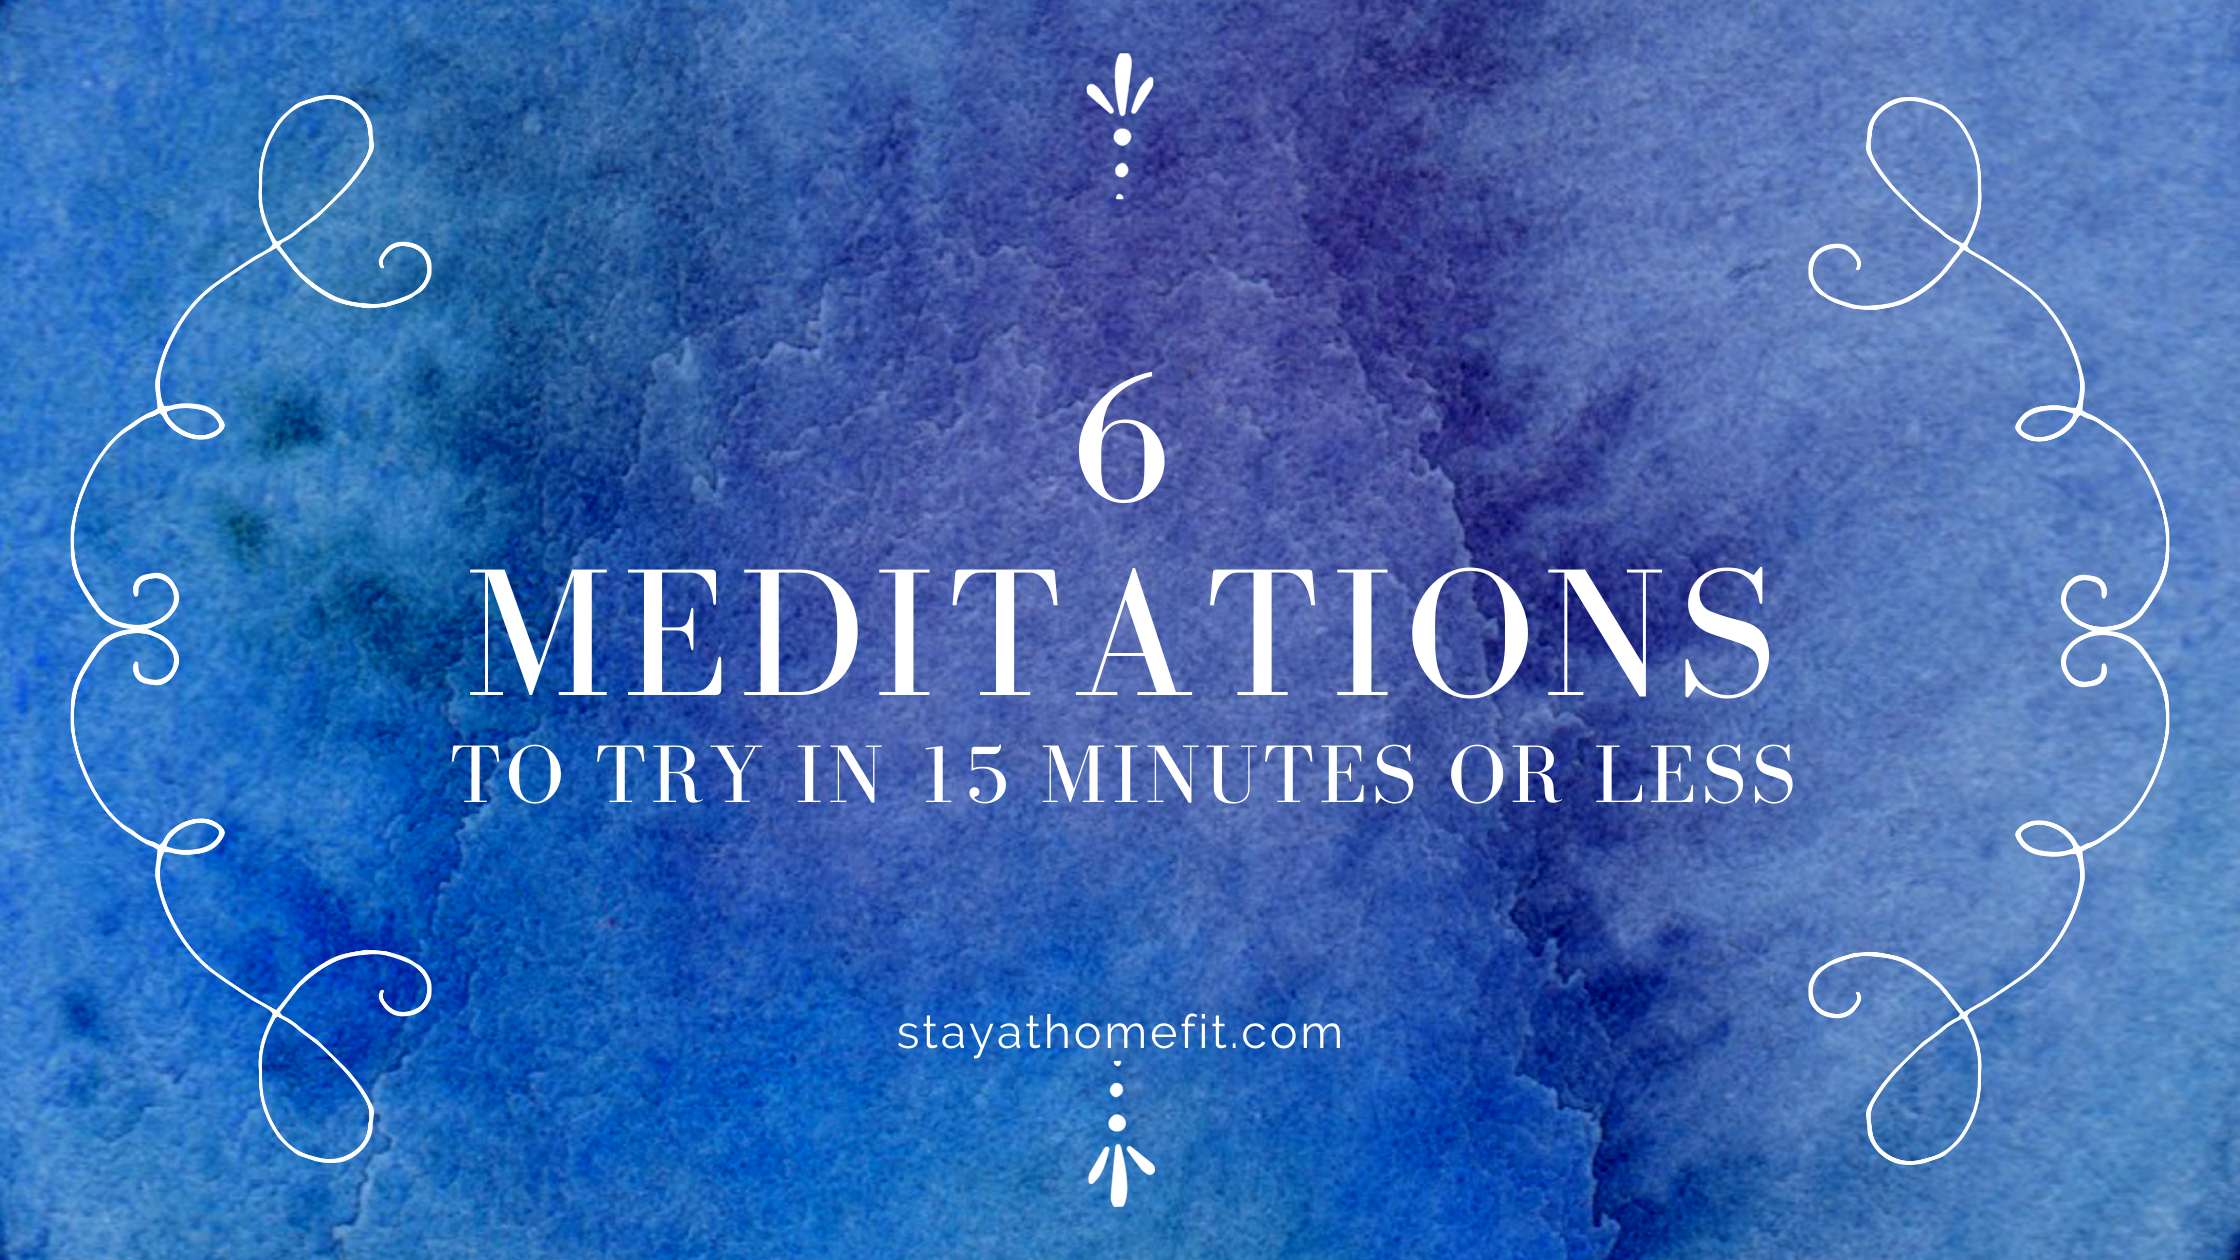 Blog Title: 6 Meditations to try in 15 minutes or less